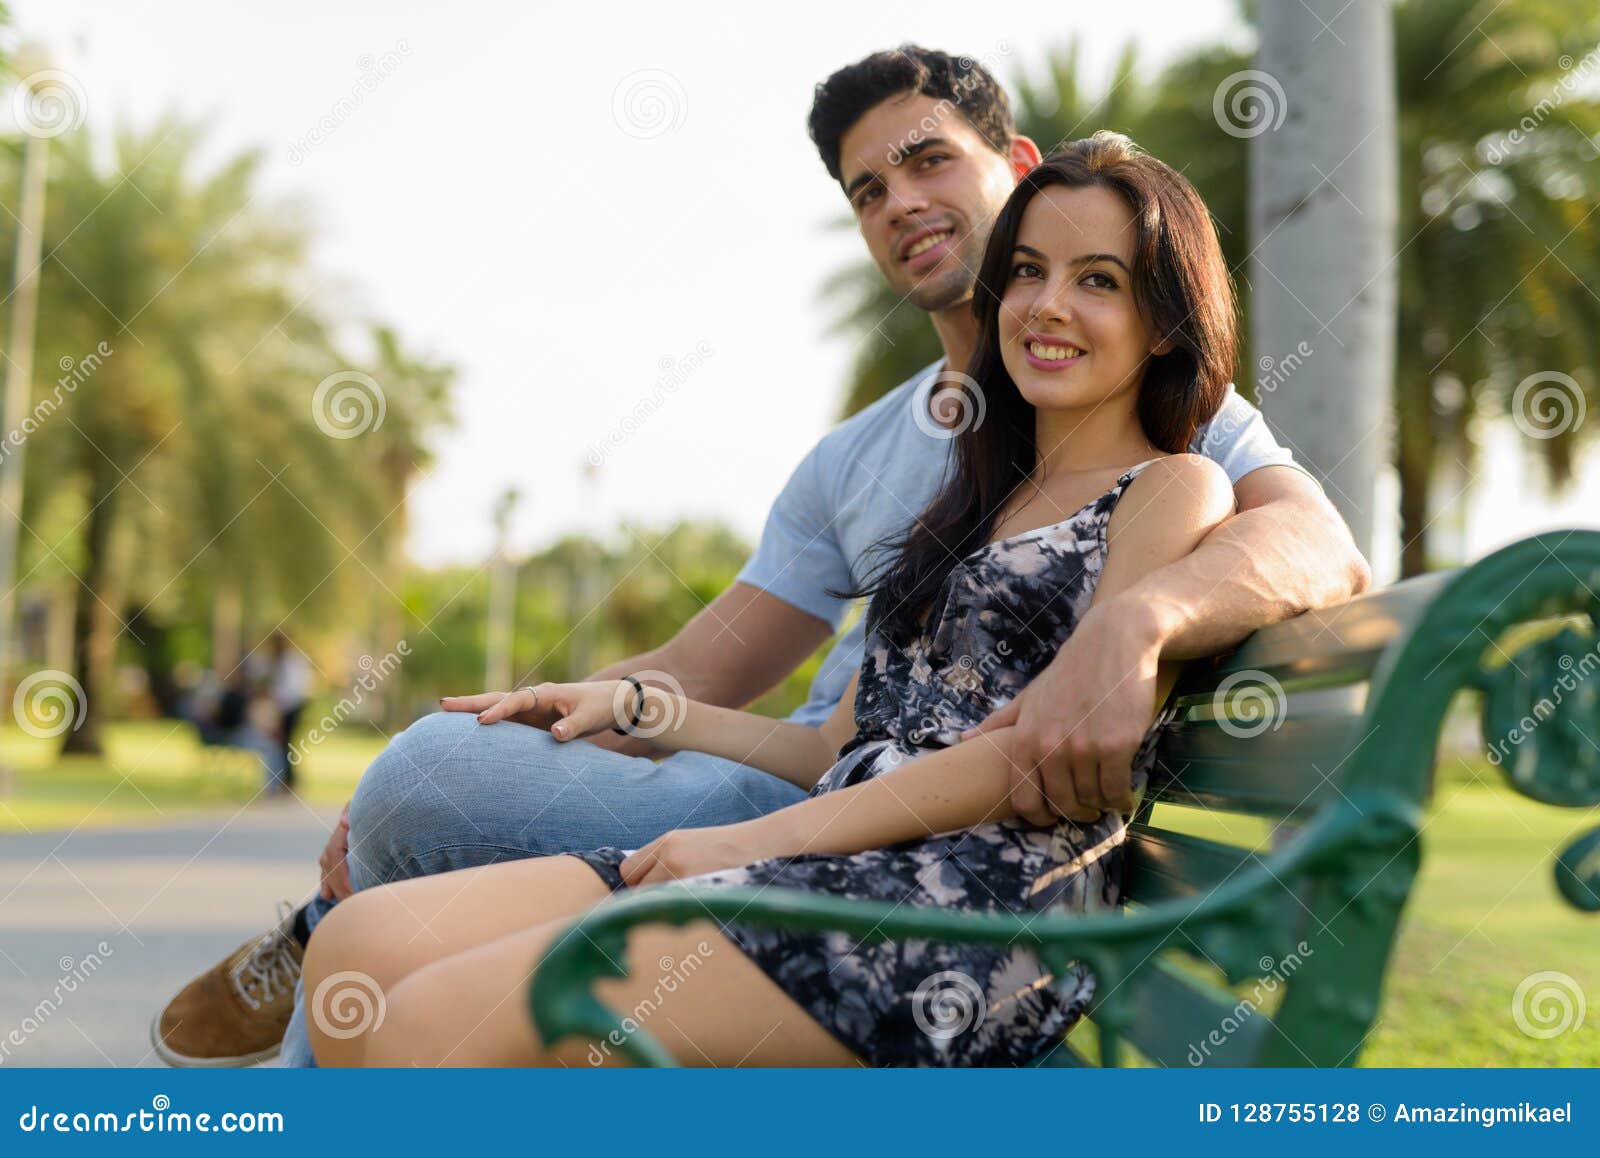 Young Hispanic Couple Relaxing In The Park Together Stock Photo Image